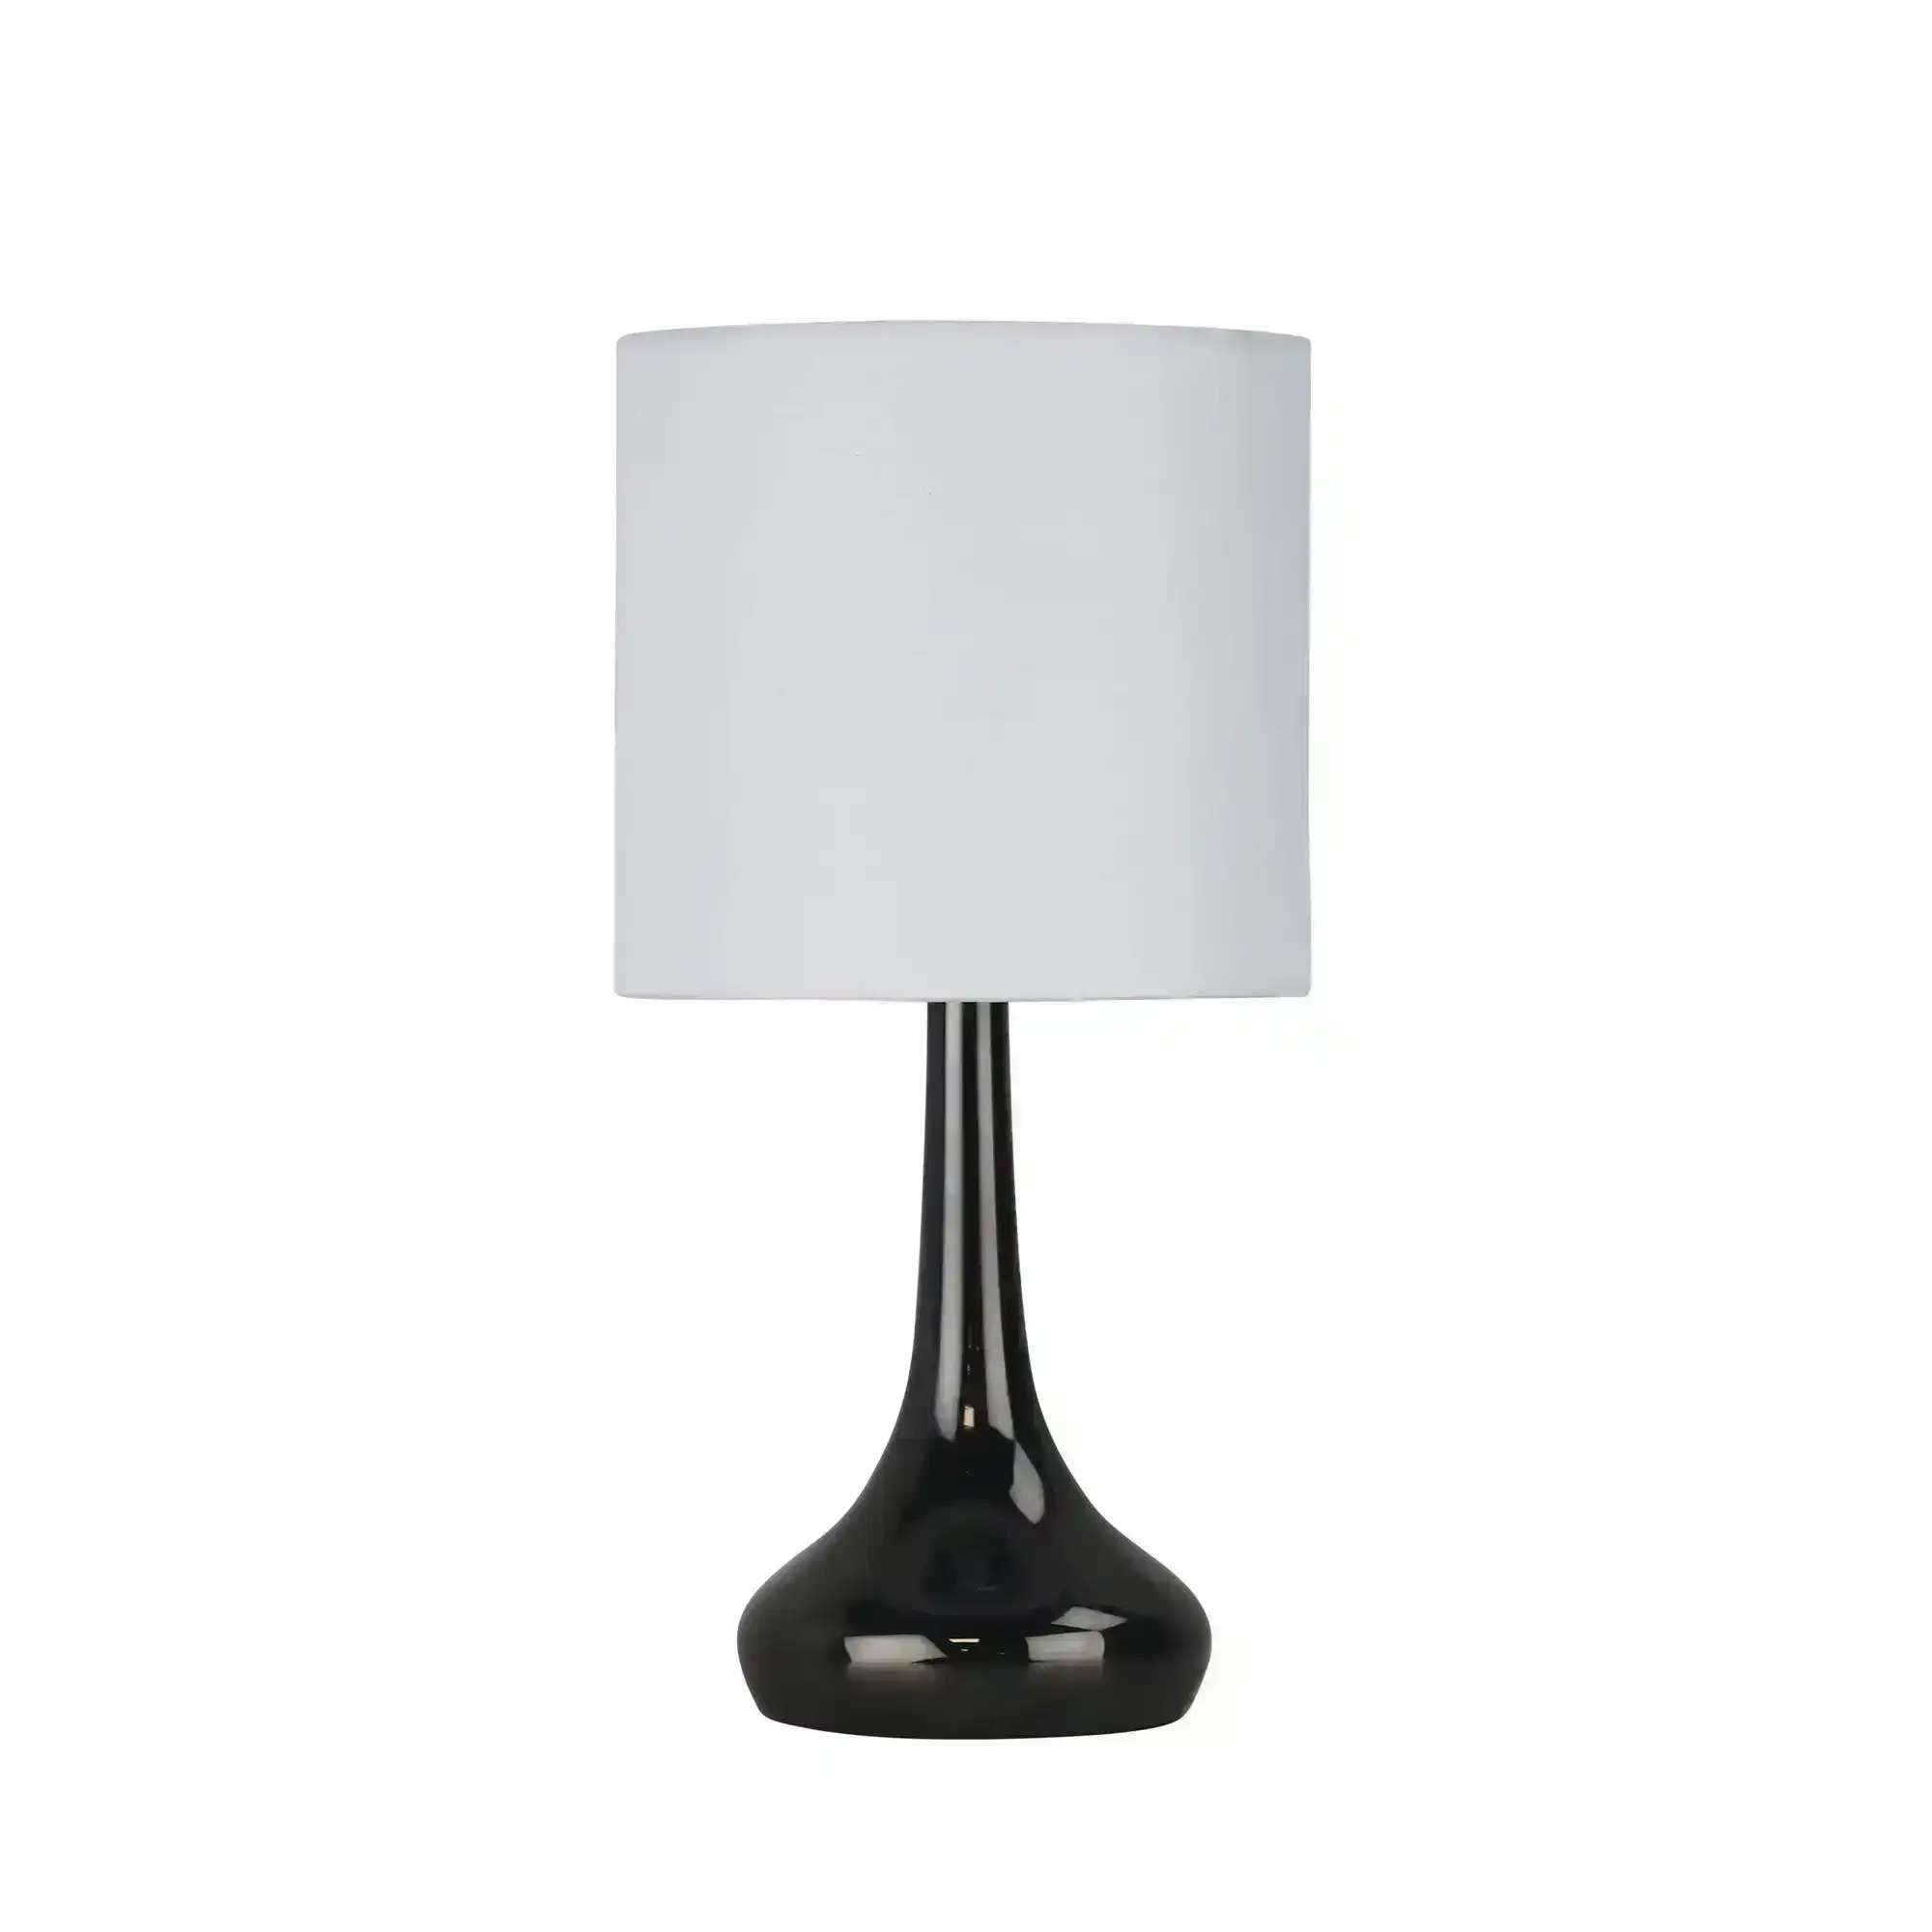 LOLA ON / OFF Touch Lamp in Gunmetal Finish